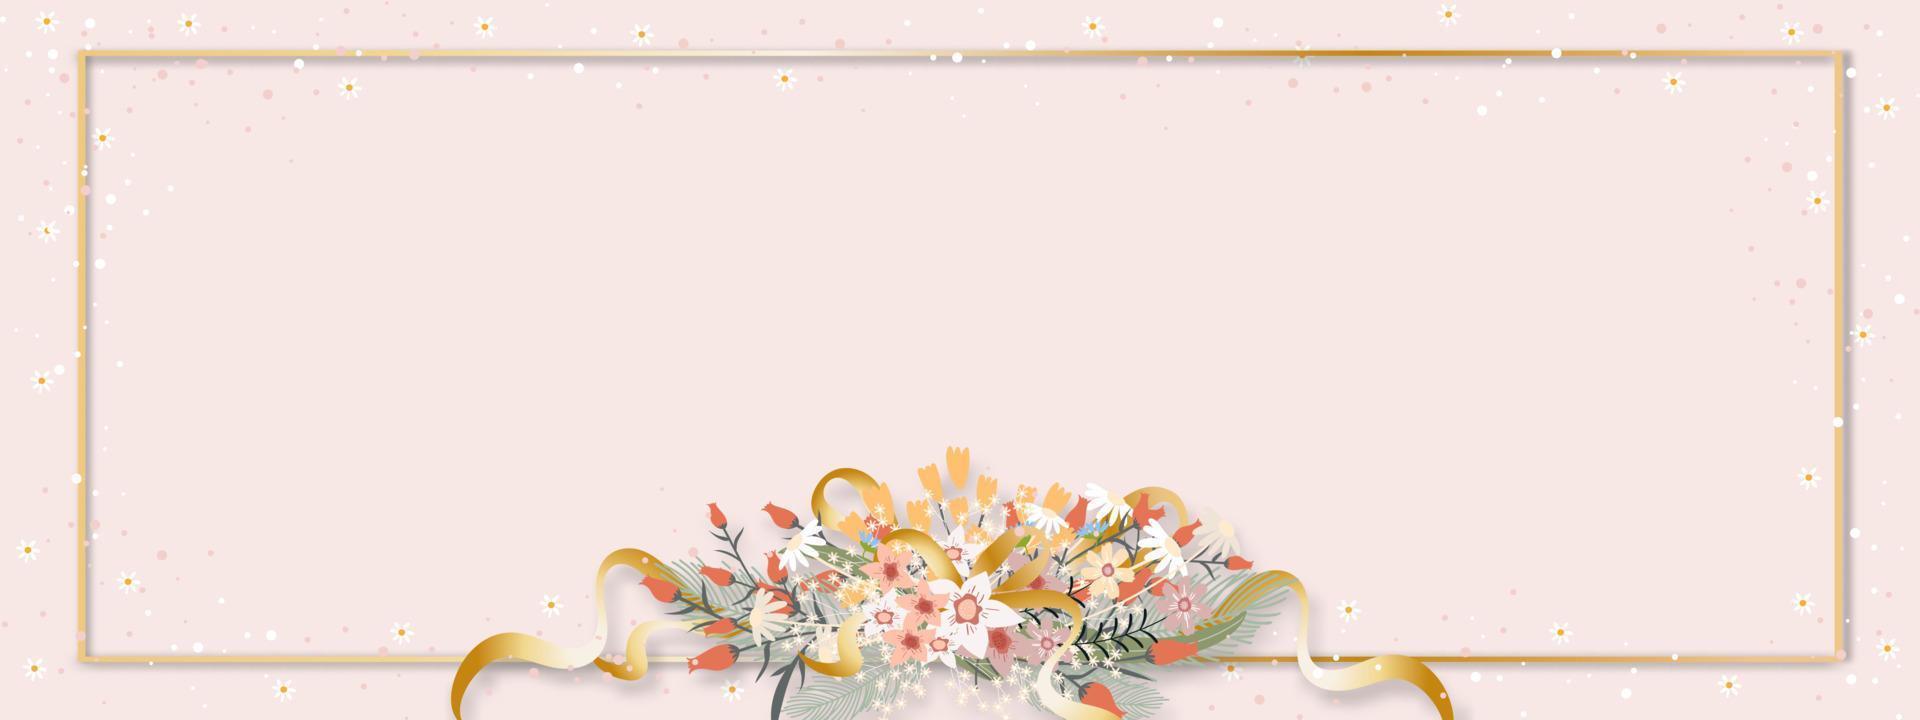 Spring background with beautiful flowers bouquet blooming on gold frame,Summer or Srpting banner for sale, Vector illustration greeting card for Mothers day,Wedding, Valentine